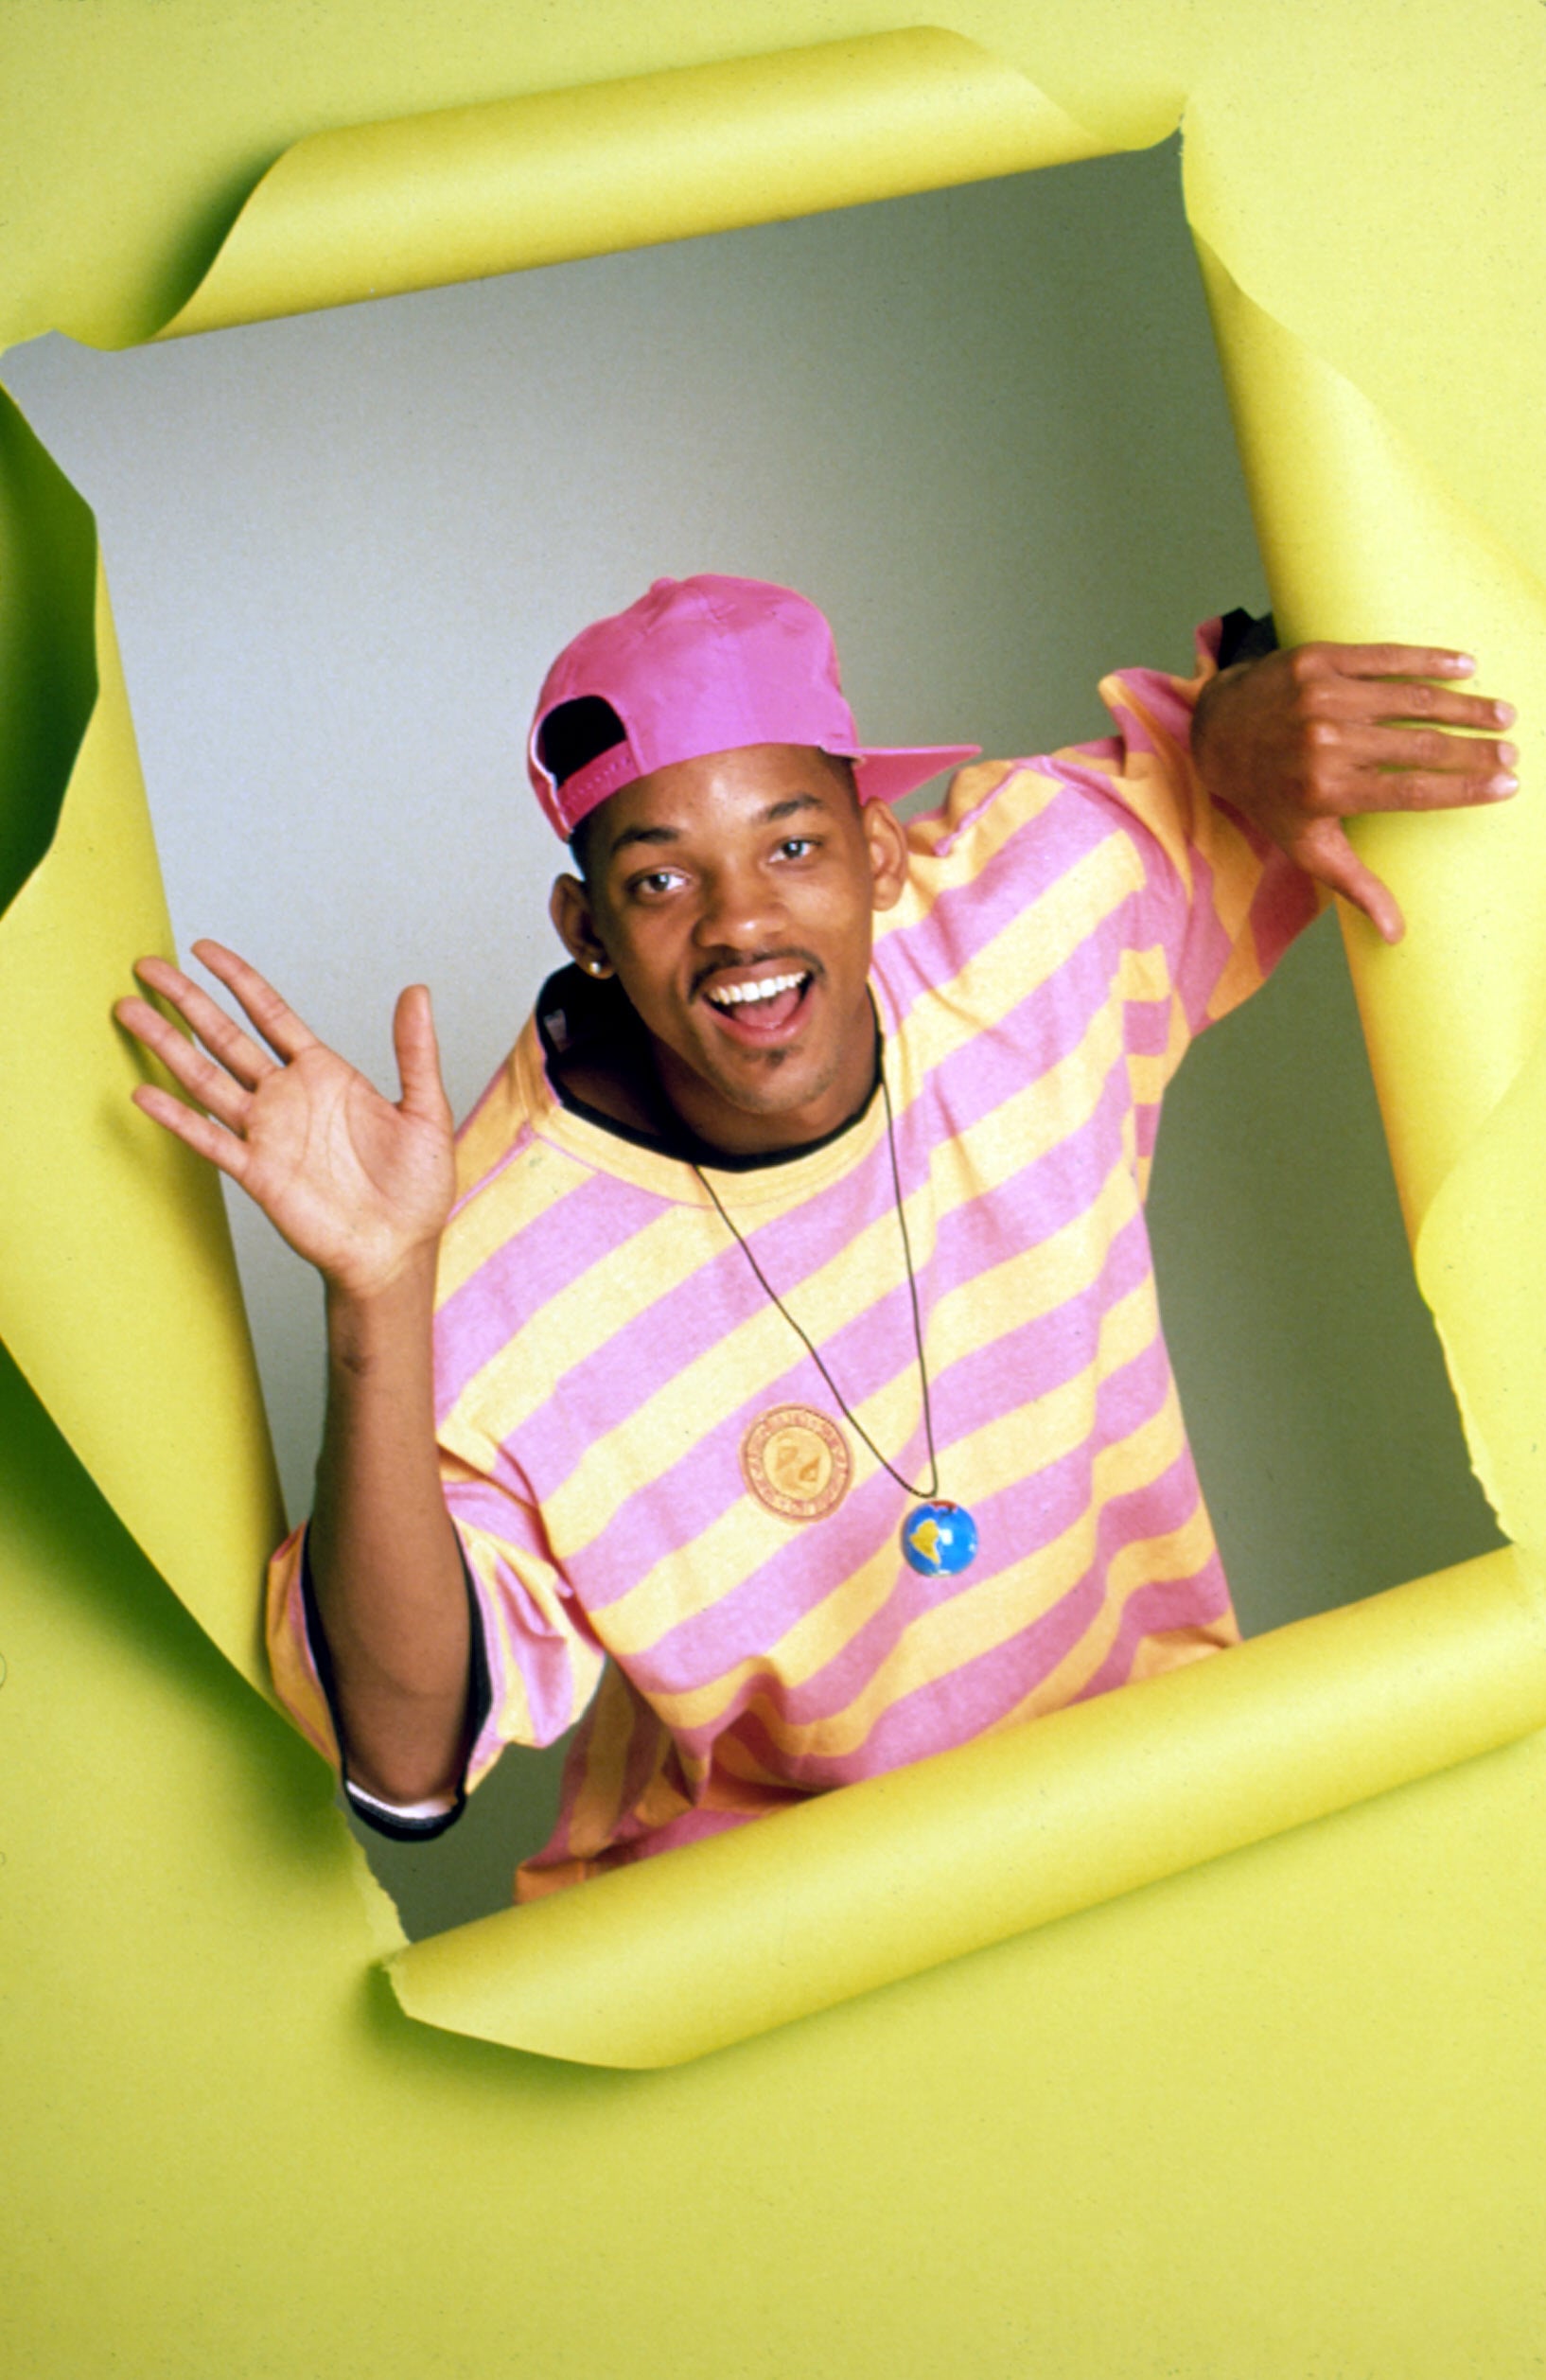 FRESH PRINCE OF BEL AIR, Will Smith, 1990-96, (c)NBC Productions/courtesy Everett Collection